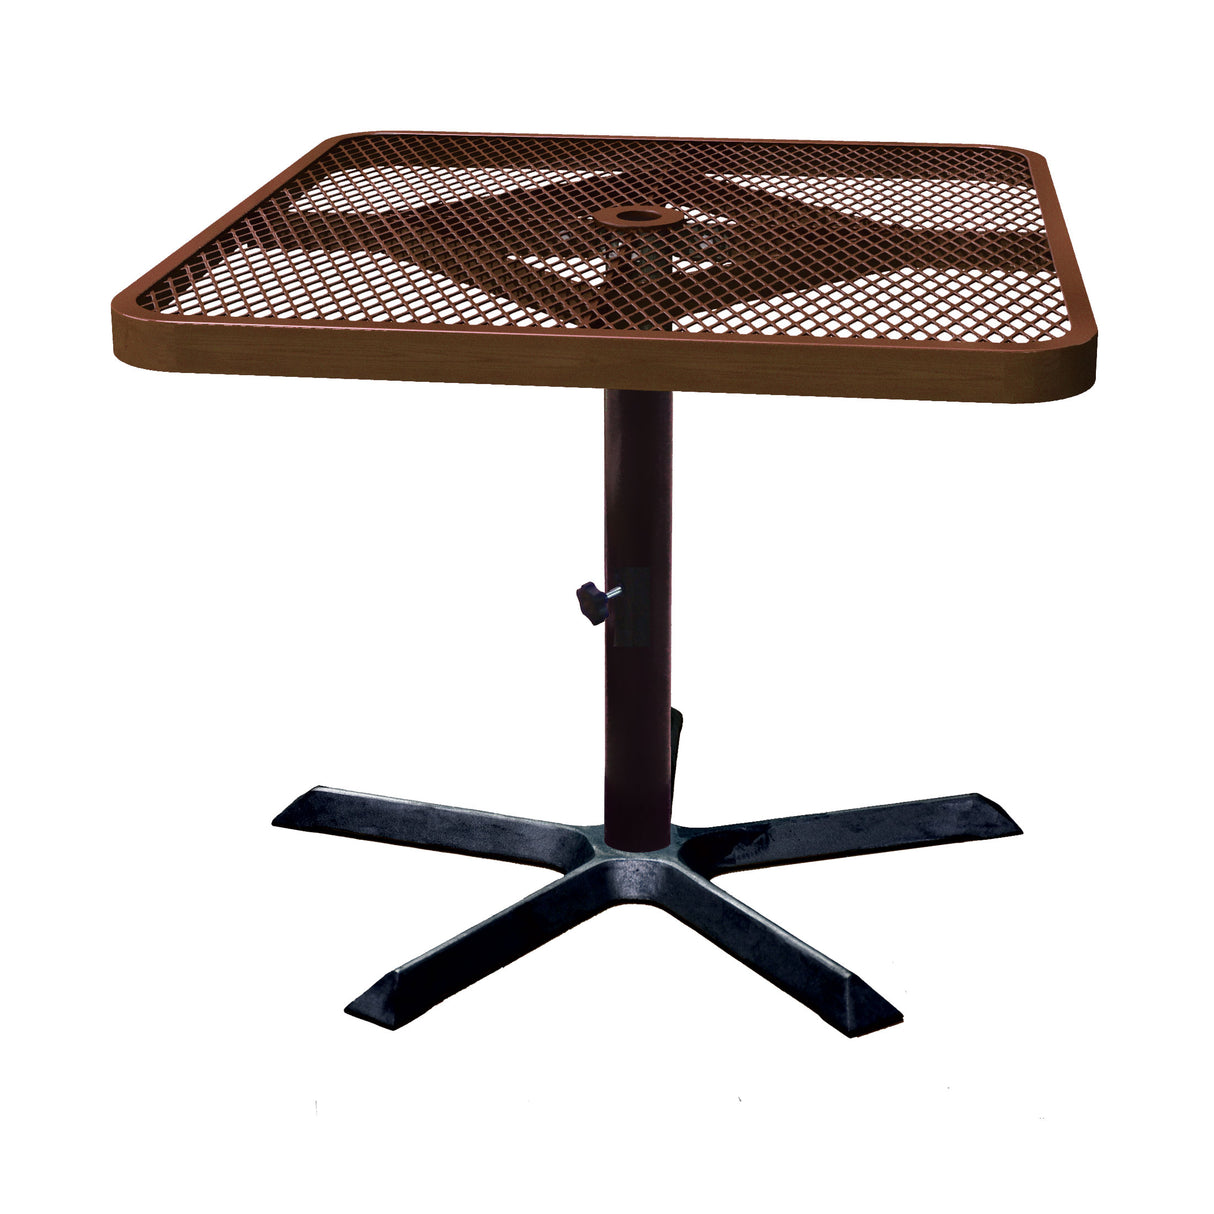 36˝ Square Expanded Pedestal Table